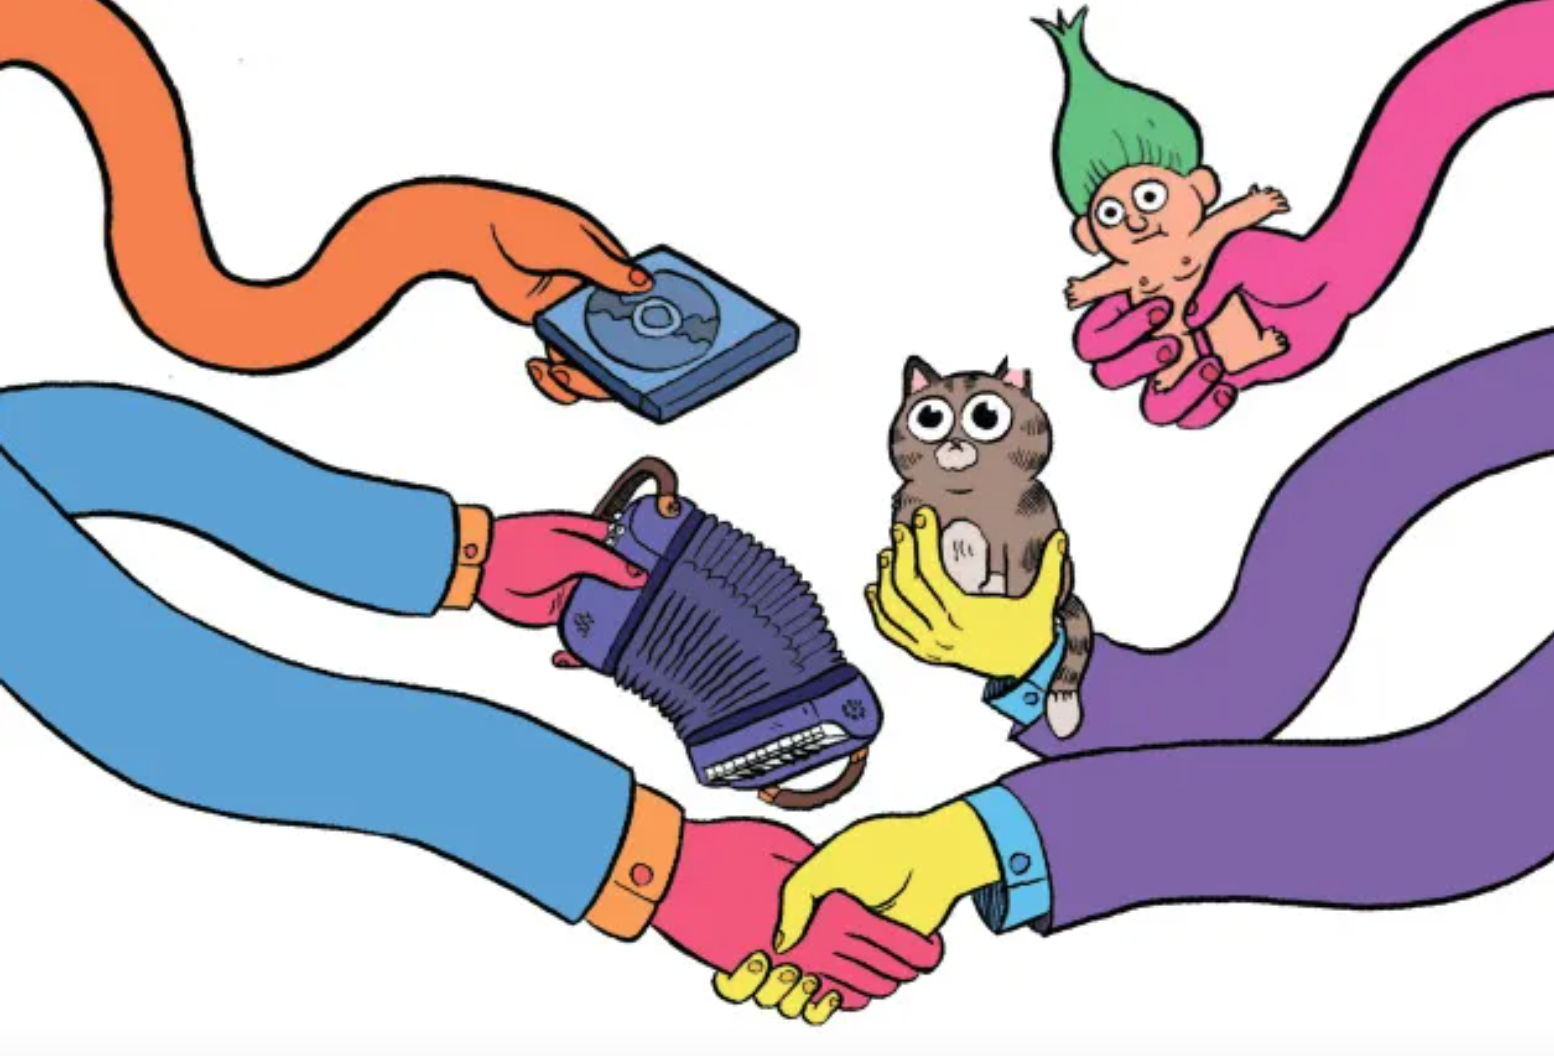 Cartoon illustration of children's hands exchanging toys by bartering